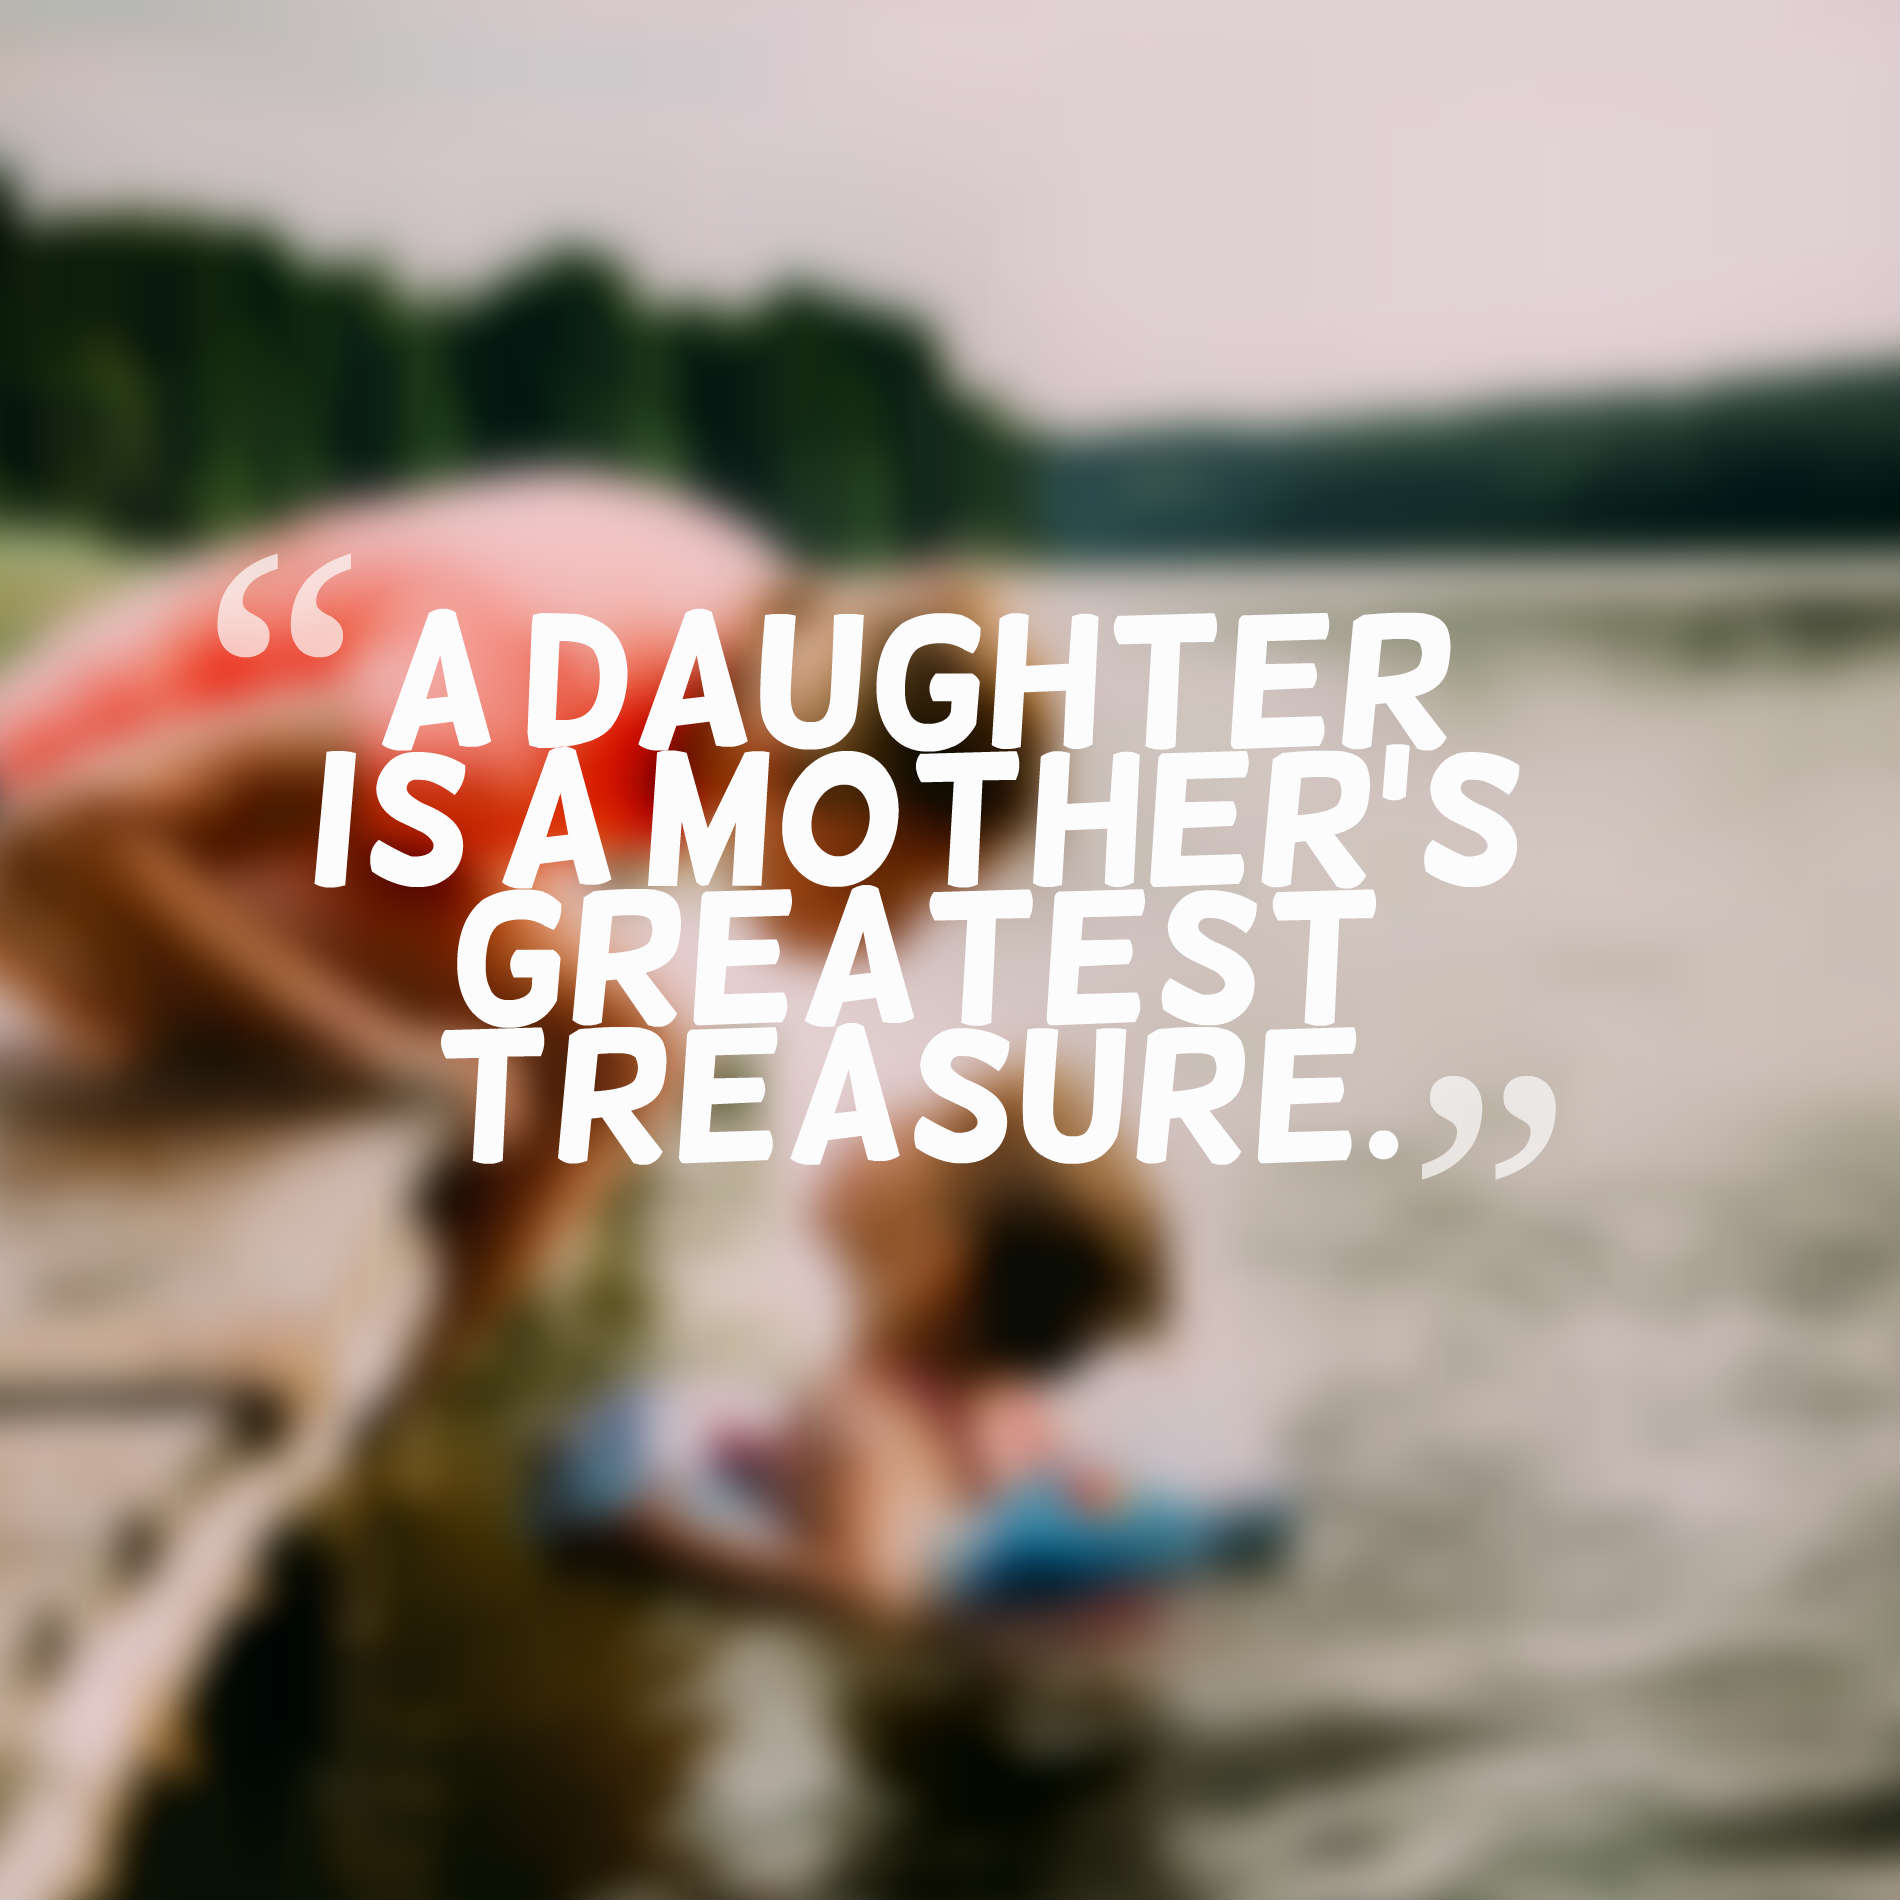 A daughter is a mother’s greatest treasure.